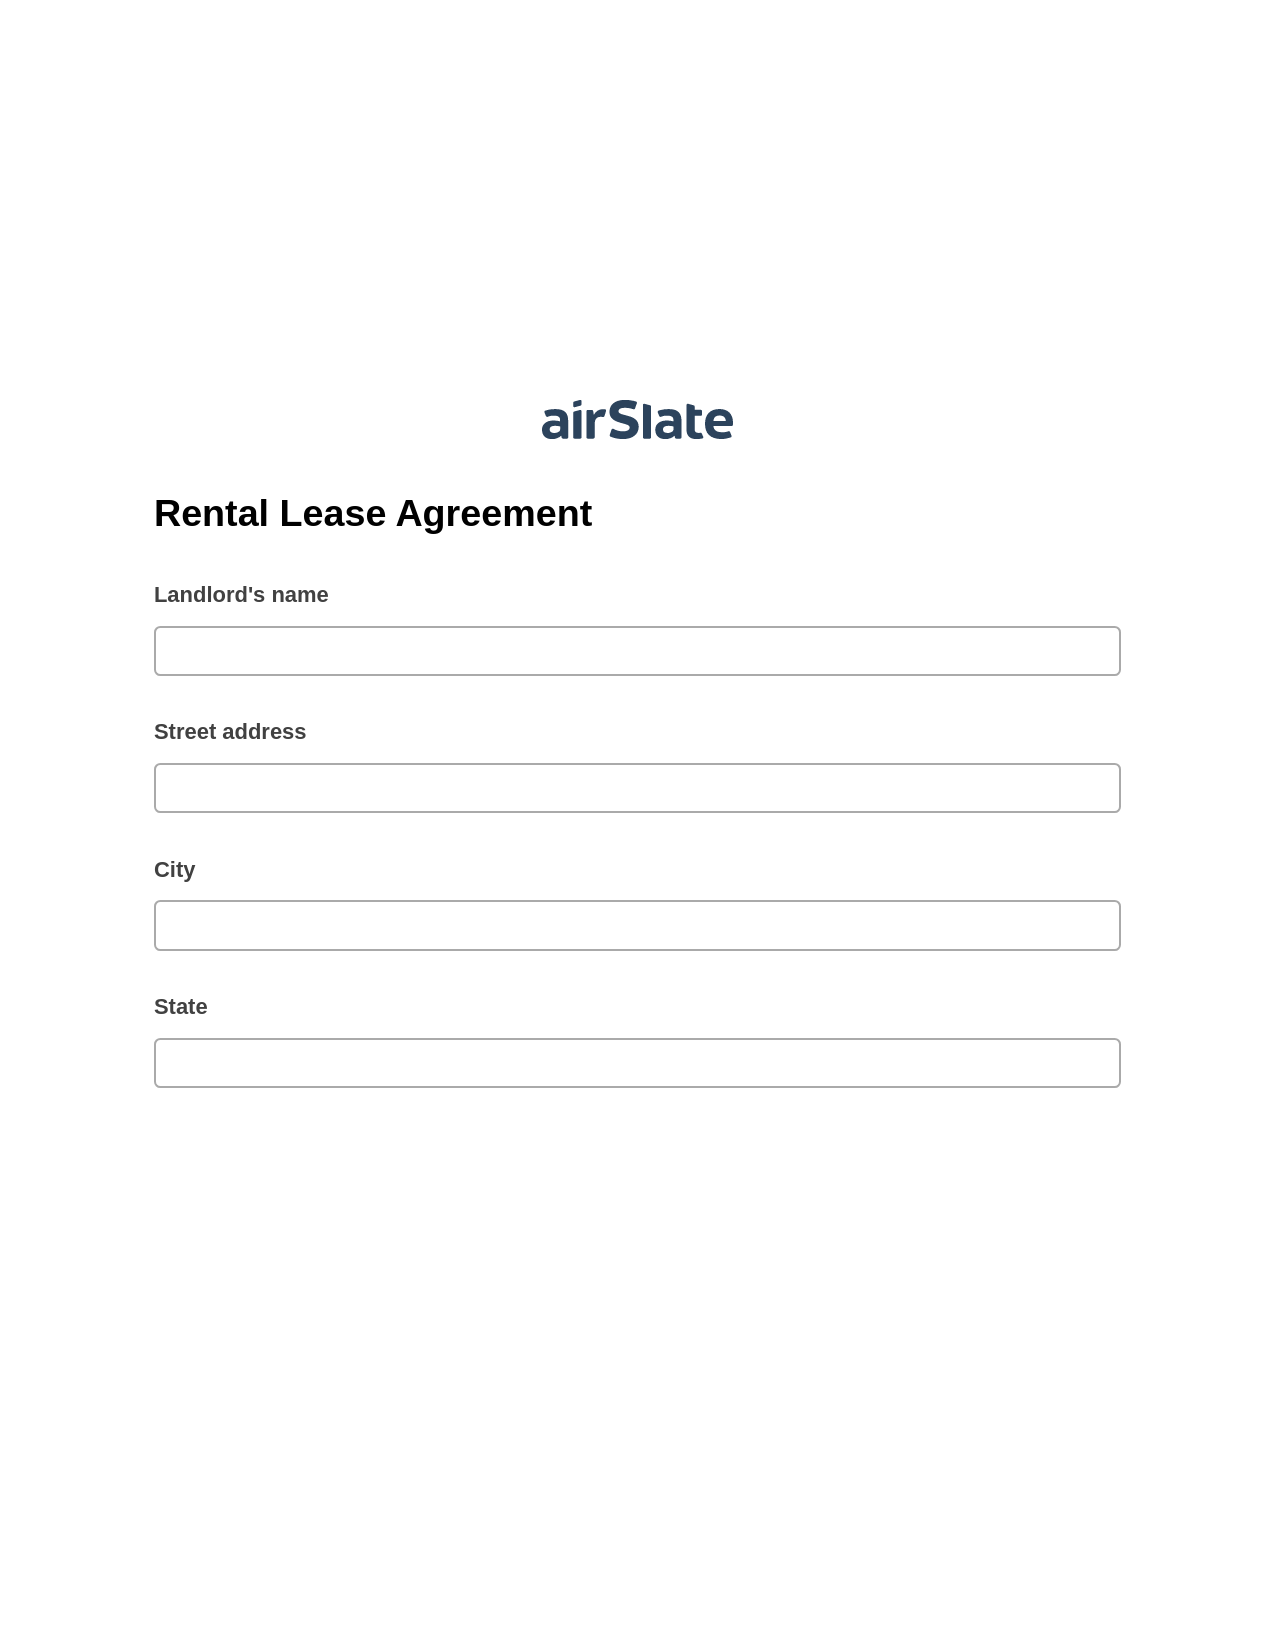 Rental Lease Agreement Pre-fill from Google Sheet Dropdown Options Bot, Audit Trail Bot, Export to NetSuite Record Bot